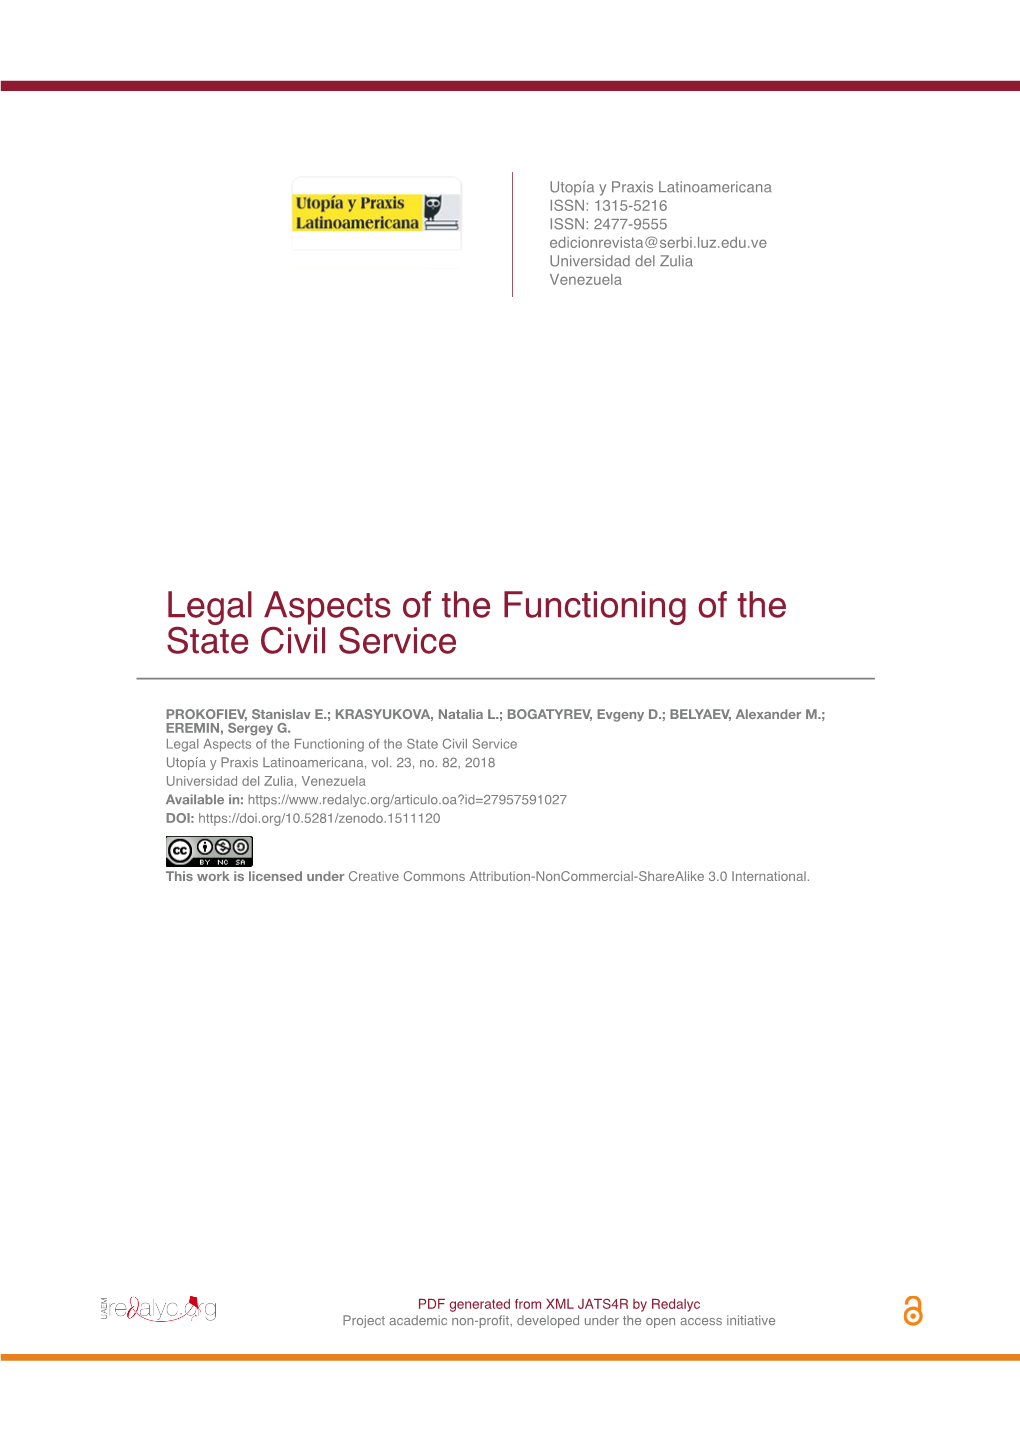 Legal Aspects of the Functioning of the State Civil Service